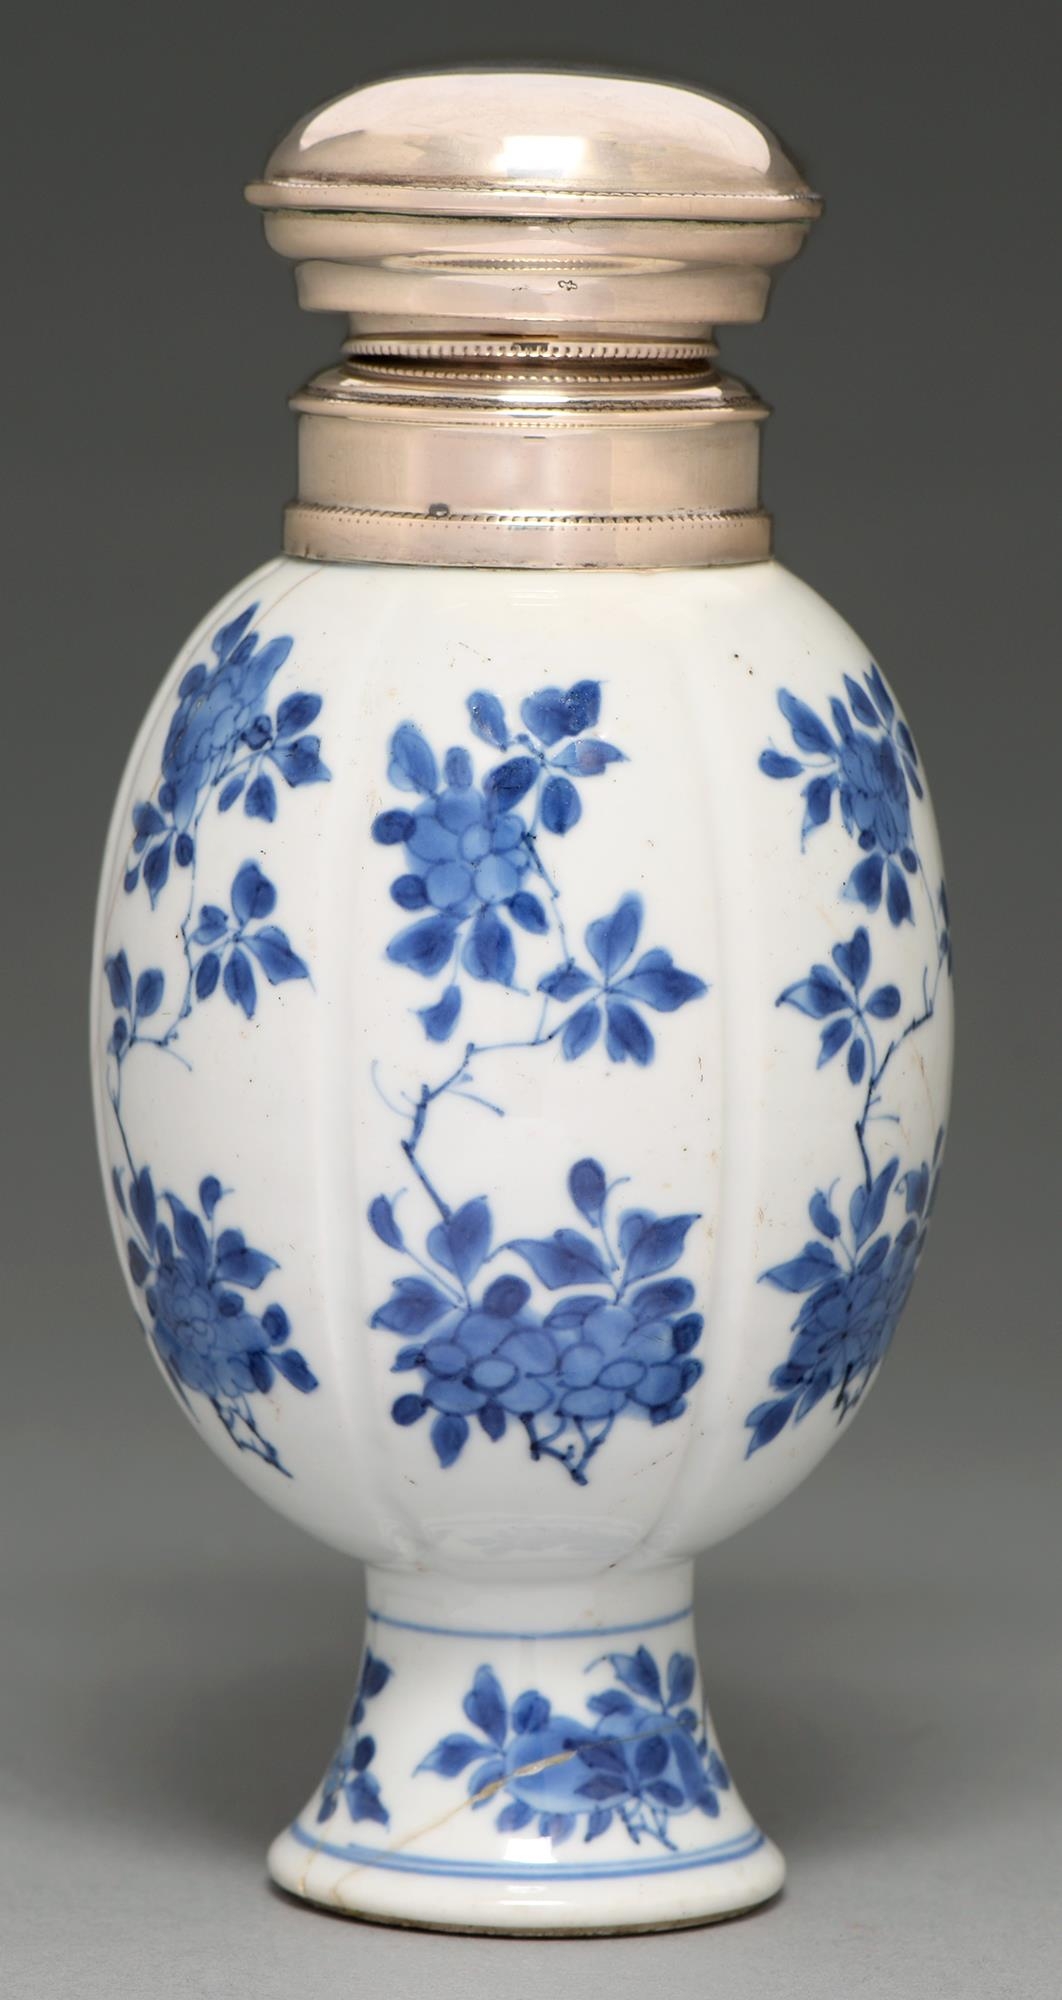 A Chinese blue and white vase, 18th c, lobed ovoid on flared foot, painted with flowering boughs